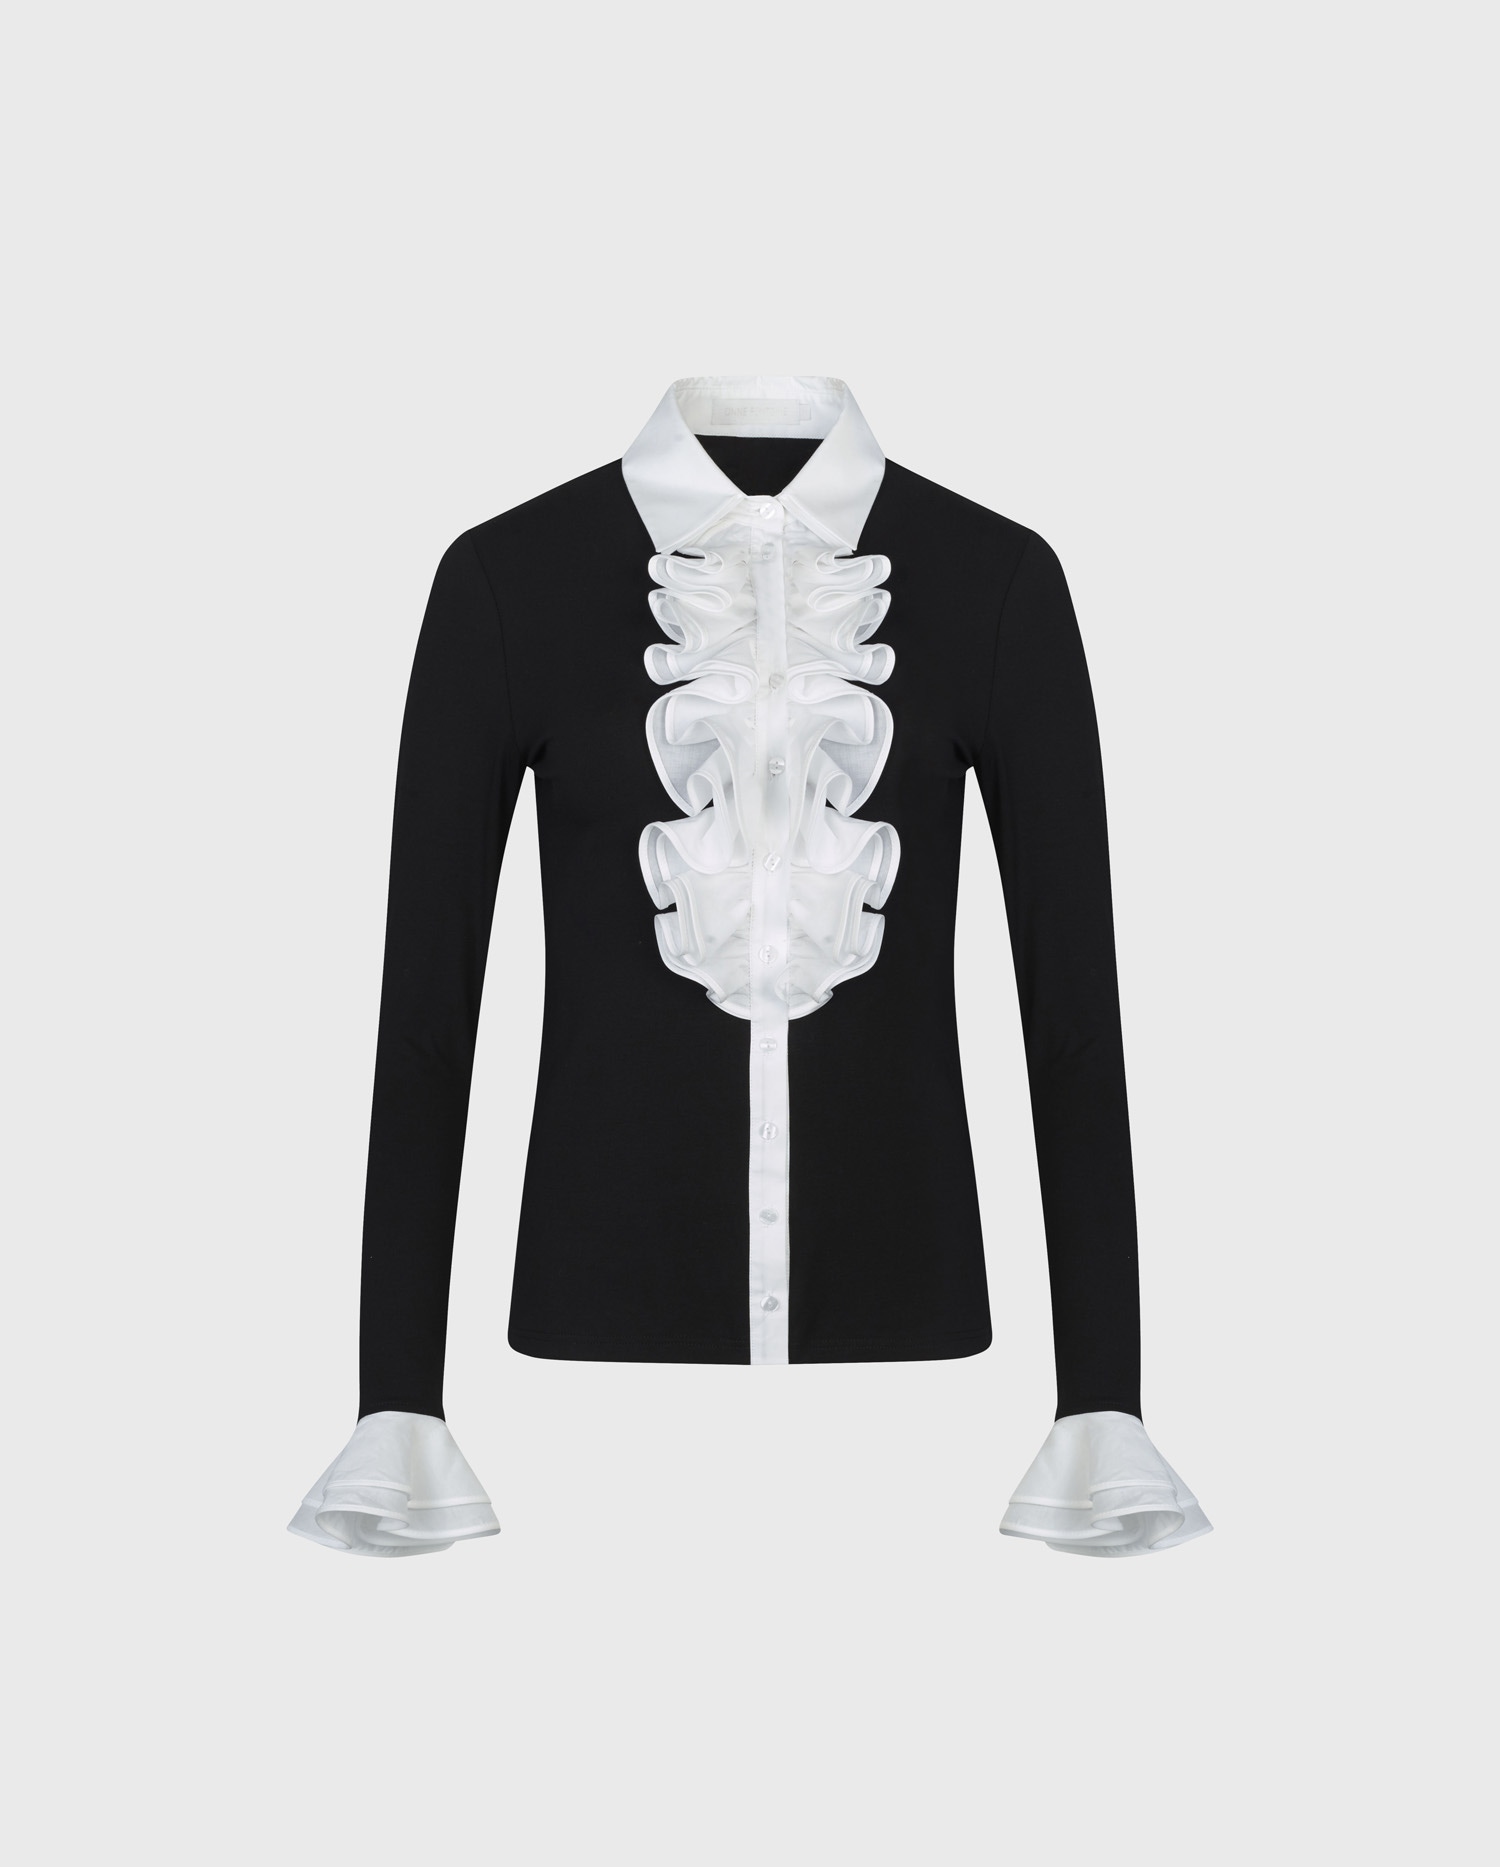 Discover The PATSY Black jersey shirt with white ruffle details from ANNE FONTAINE